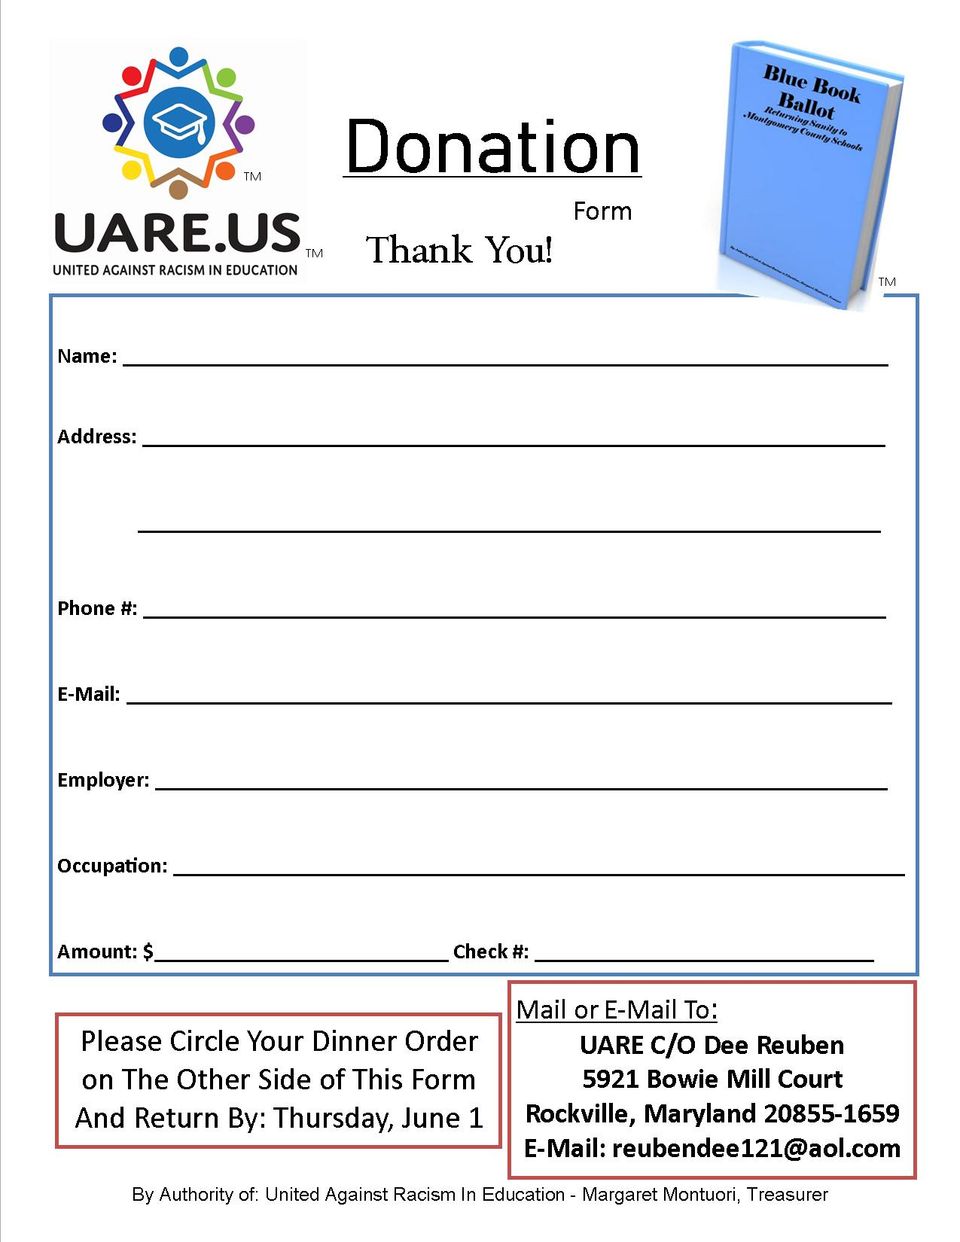 Donation form w b.book 6.3.23 event